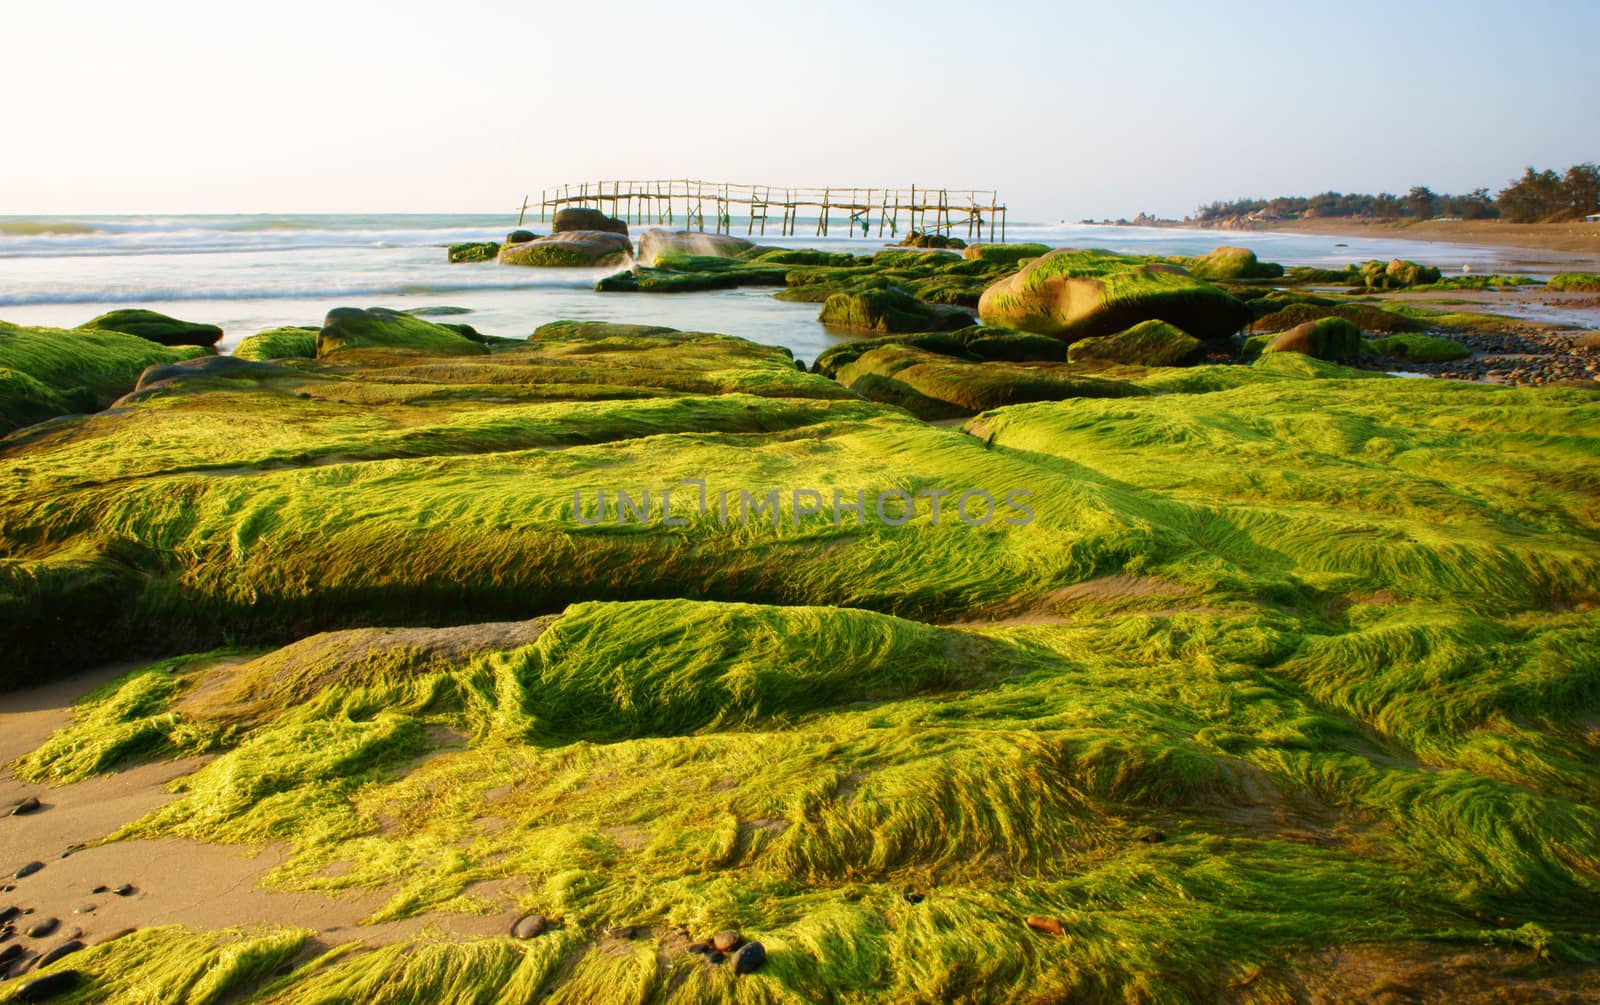 Impressive landscape with green moss, stone on beach by xuanhuongho